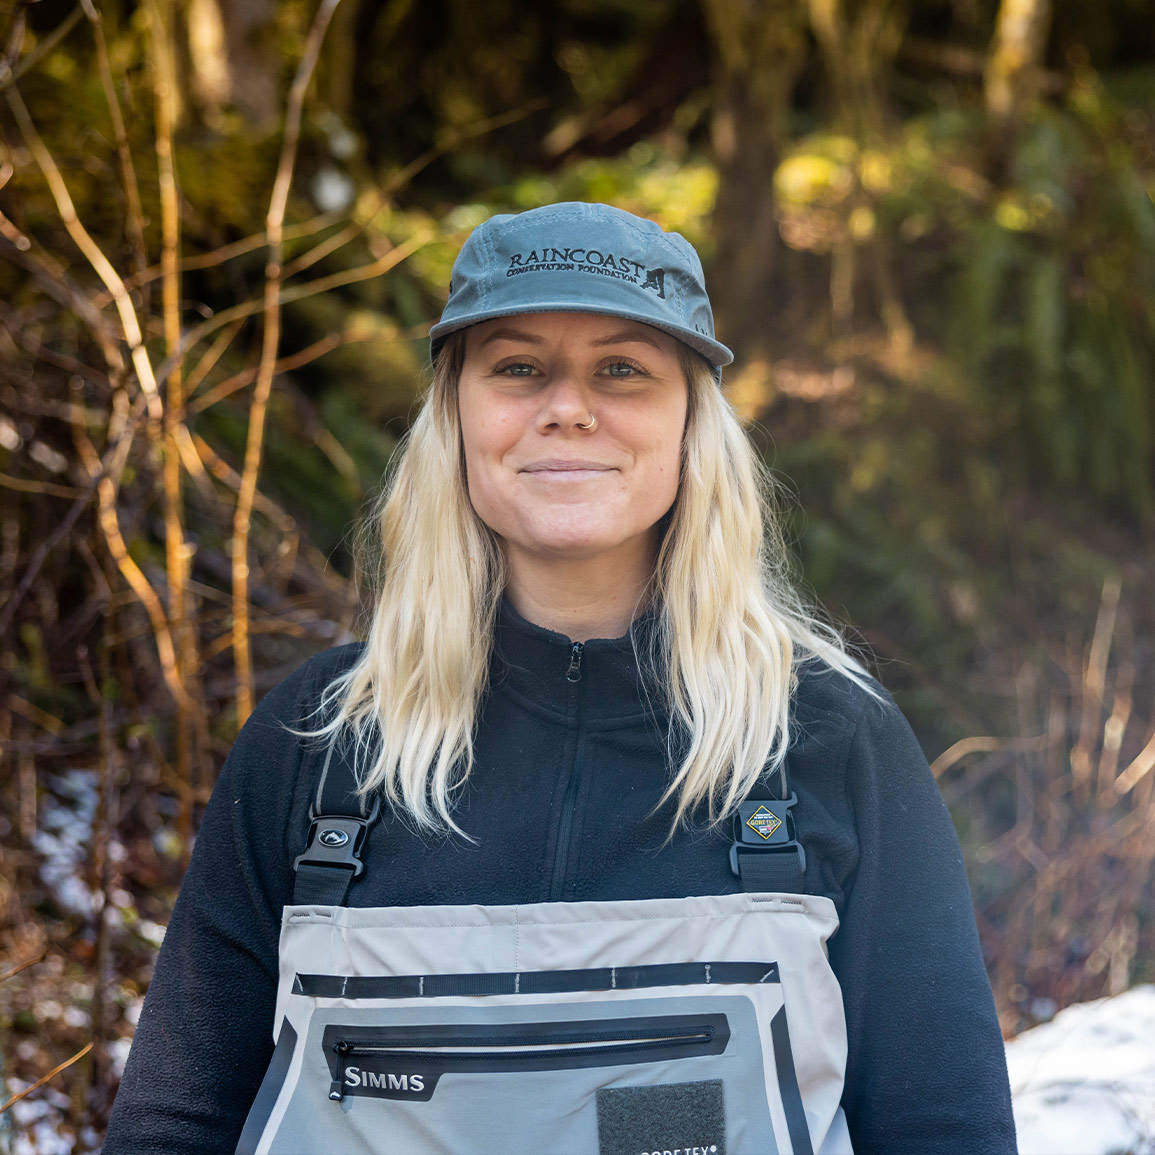 Chelsea Greer, Wolf Conservation Program Coordinator, with her Raincoast hat and rain gear, smiling into the forest.